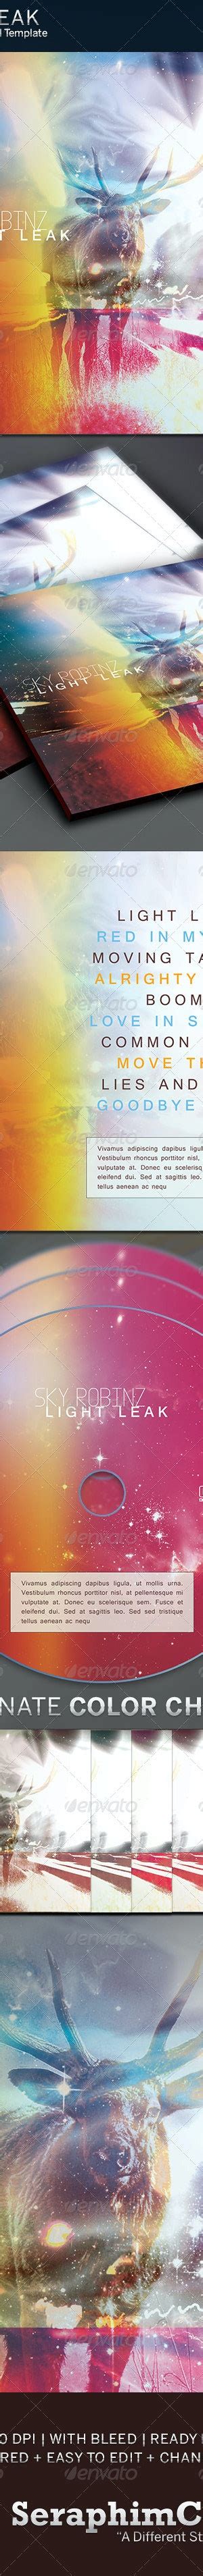 Light Leak Cd Cover Artwork Template By Seraphimchris Graphicriver